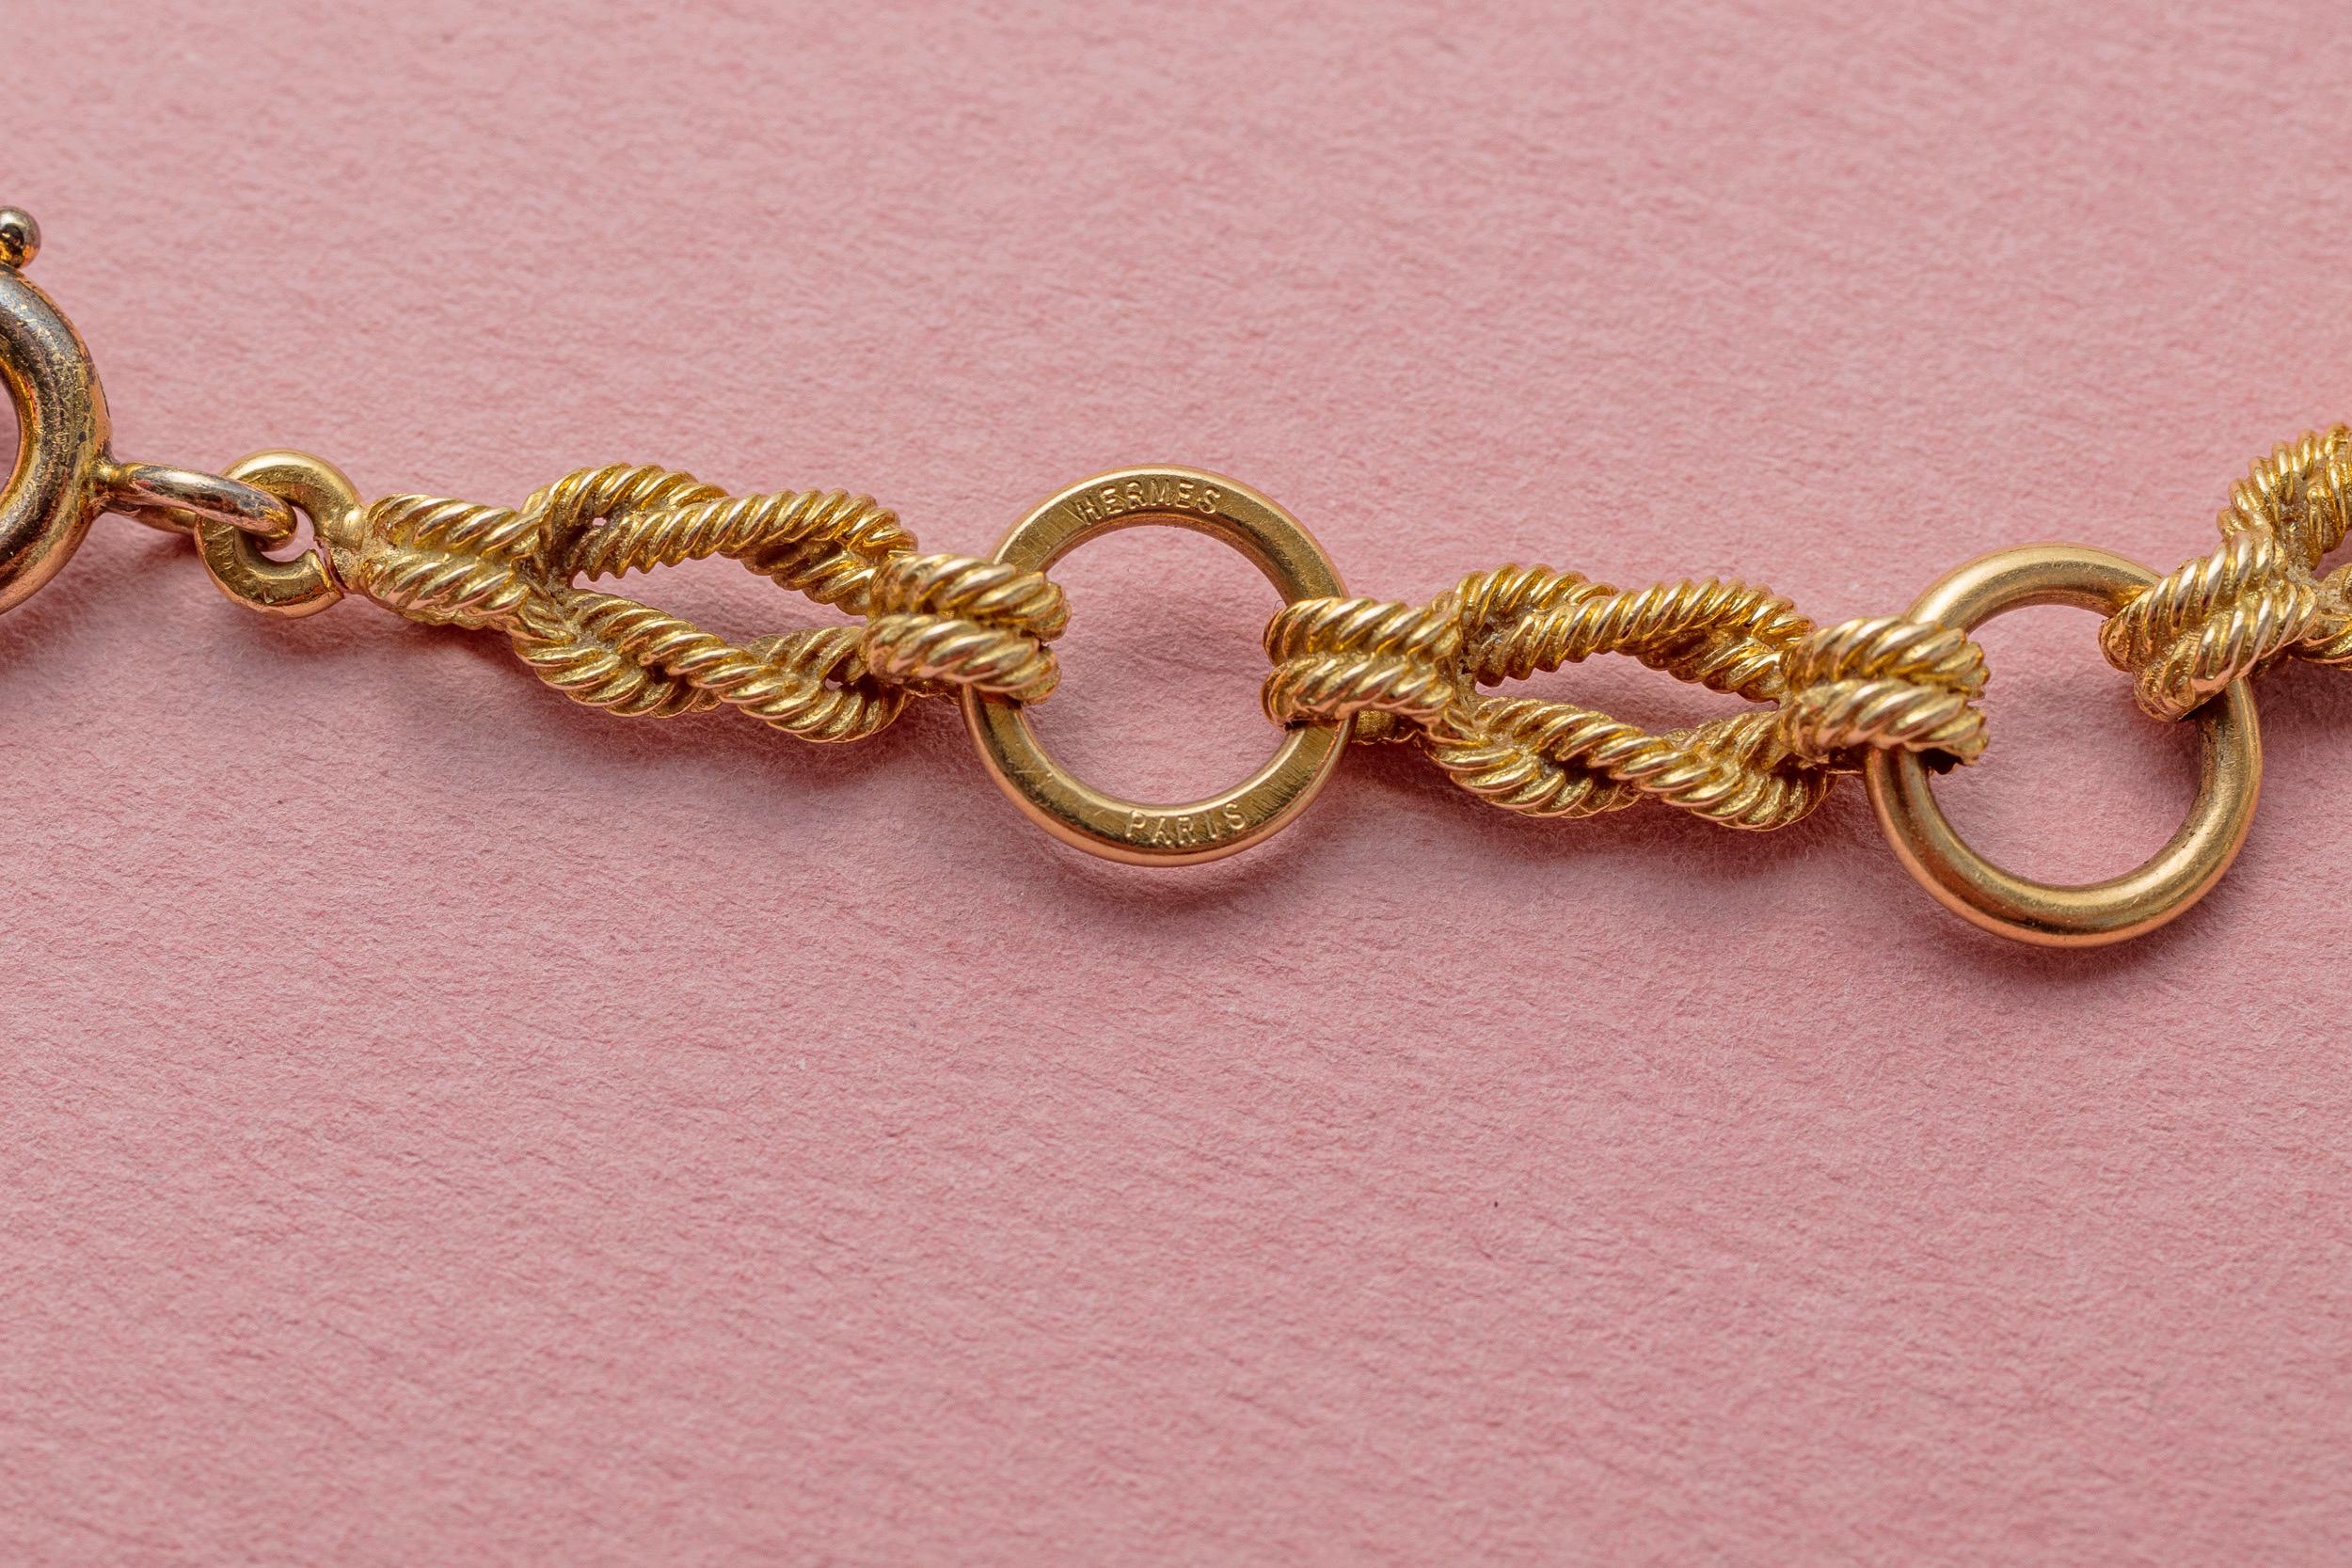 An 18 carat yellow gold necklace with links of flat knots tied with gold ropes alternated by round links, French mastermark: for Pierre Lefebvre, signed and numbered: Hermès Paris, French, circa 1970.

weight: 38.78 grams
length: 42 cm